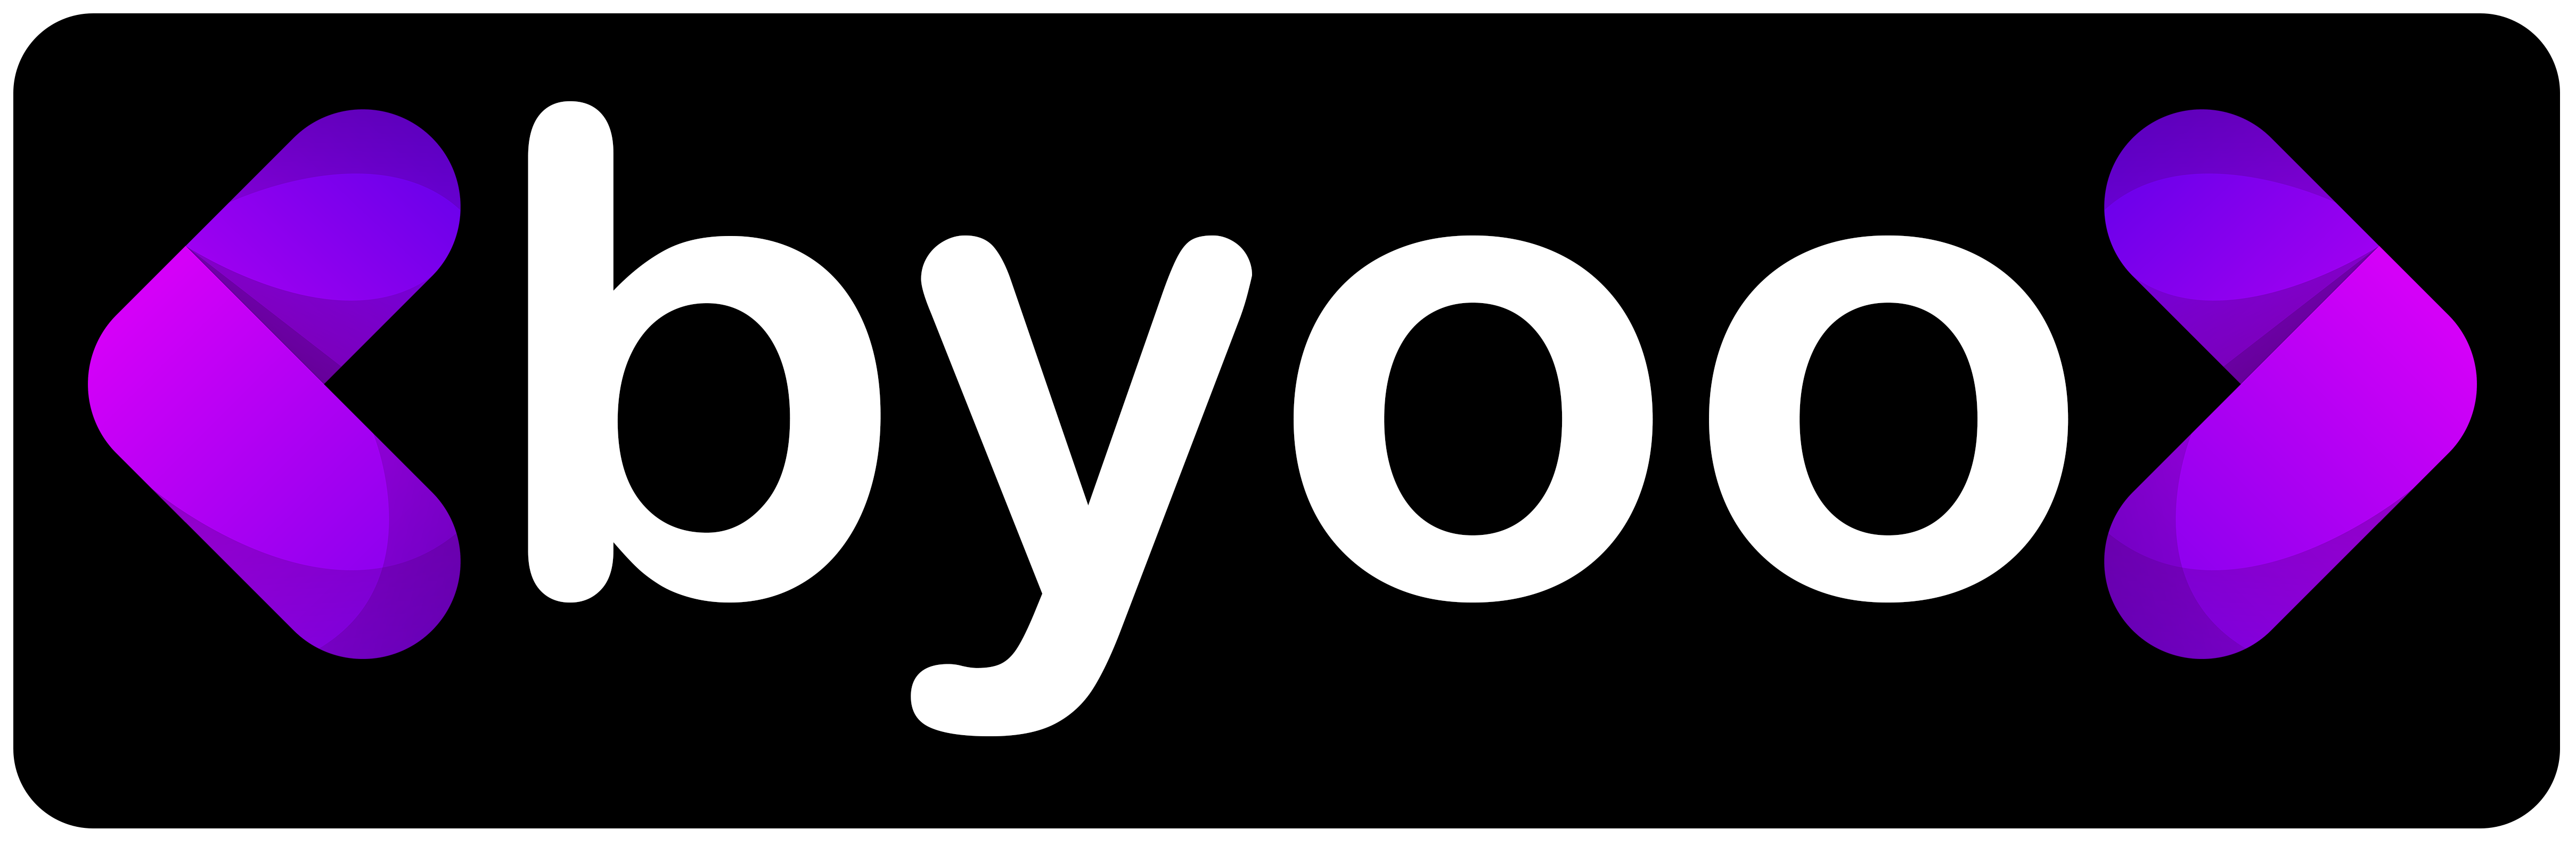 Byoo - Quintessentially You!